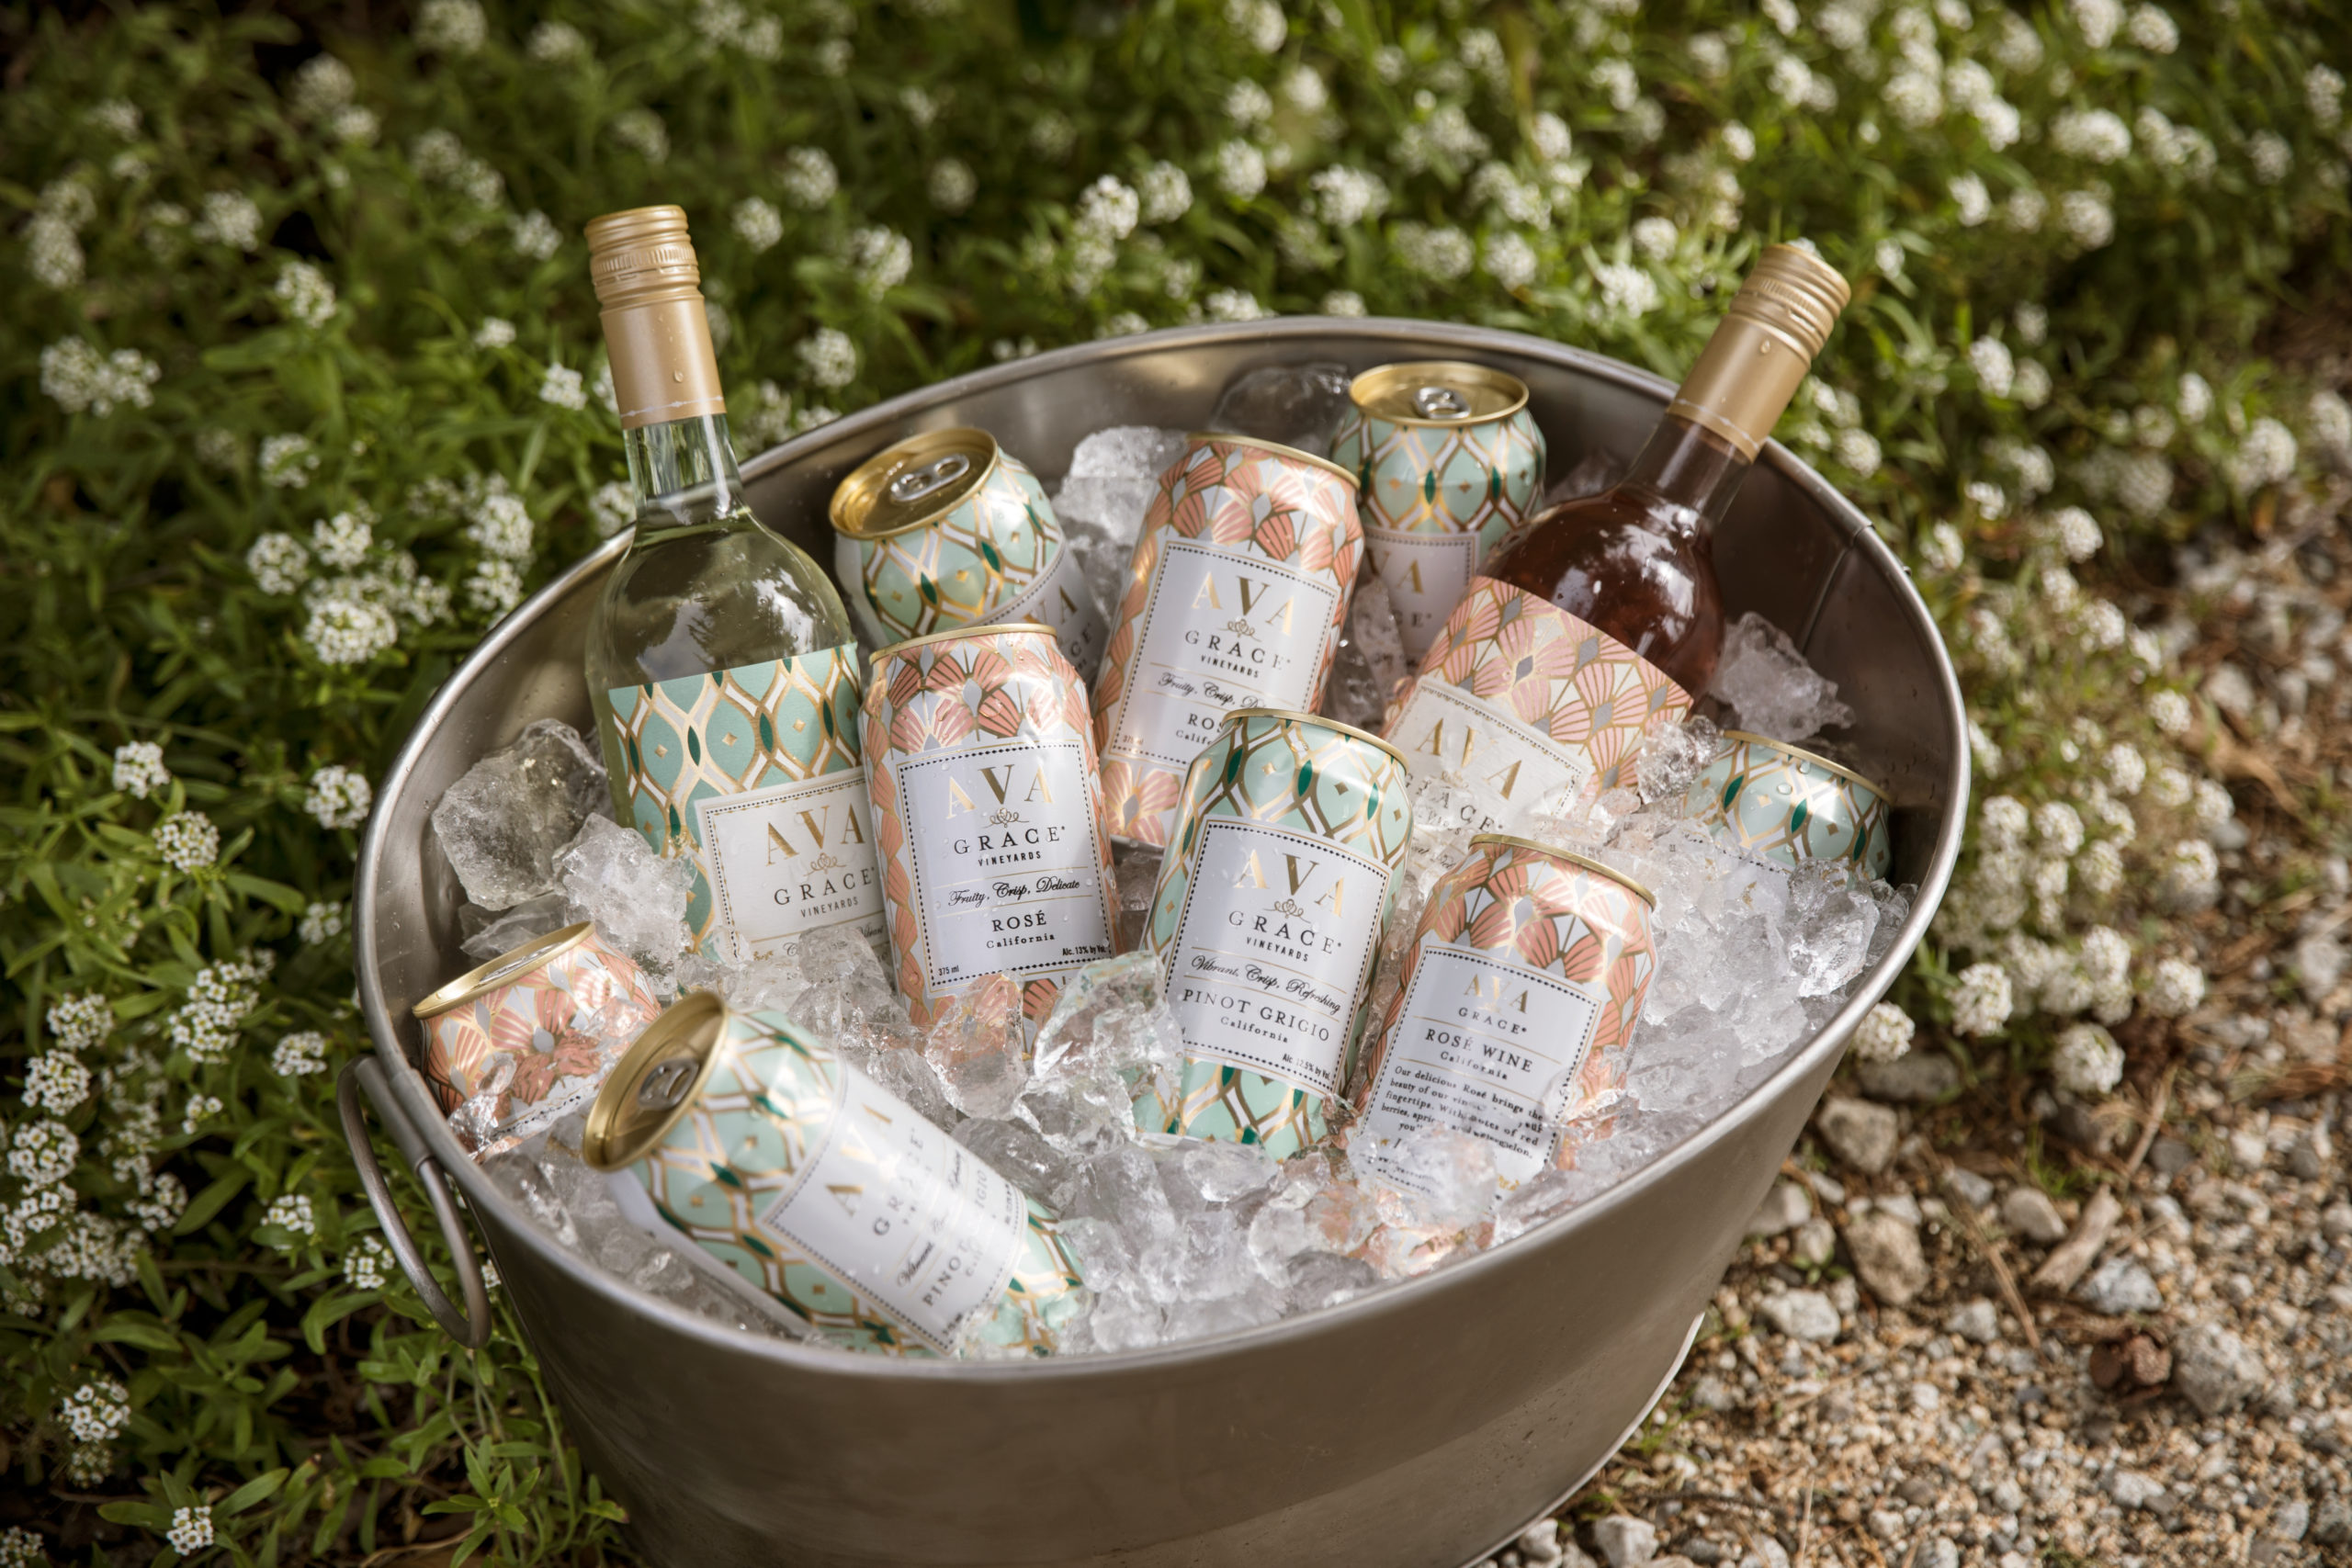 An ice bucket filled with bottles and cans of AVA Grace wines at a summer backyard BBQ.